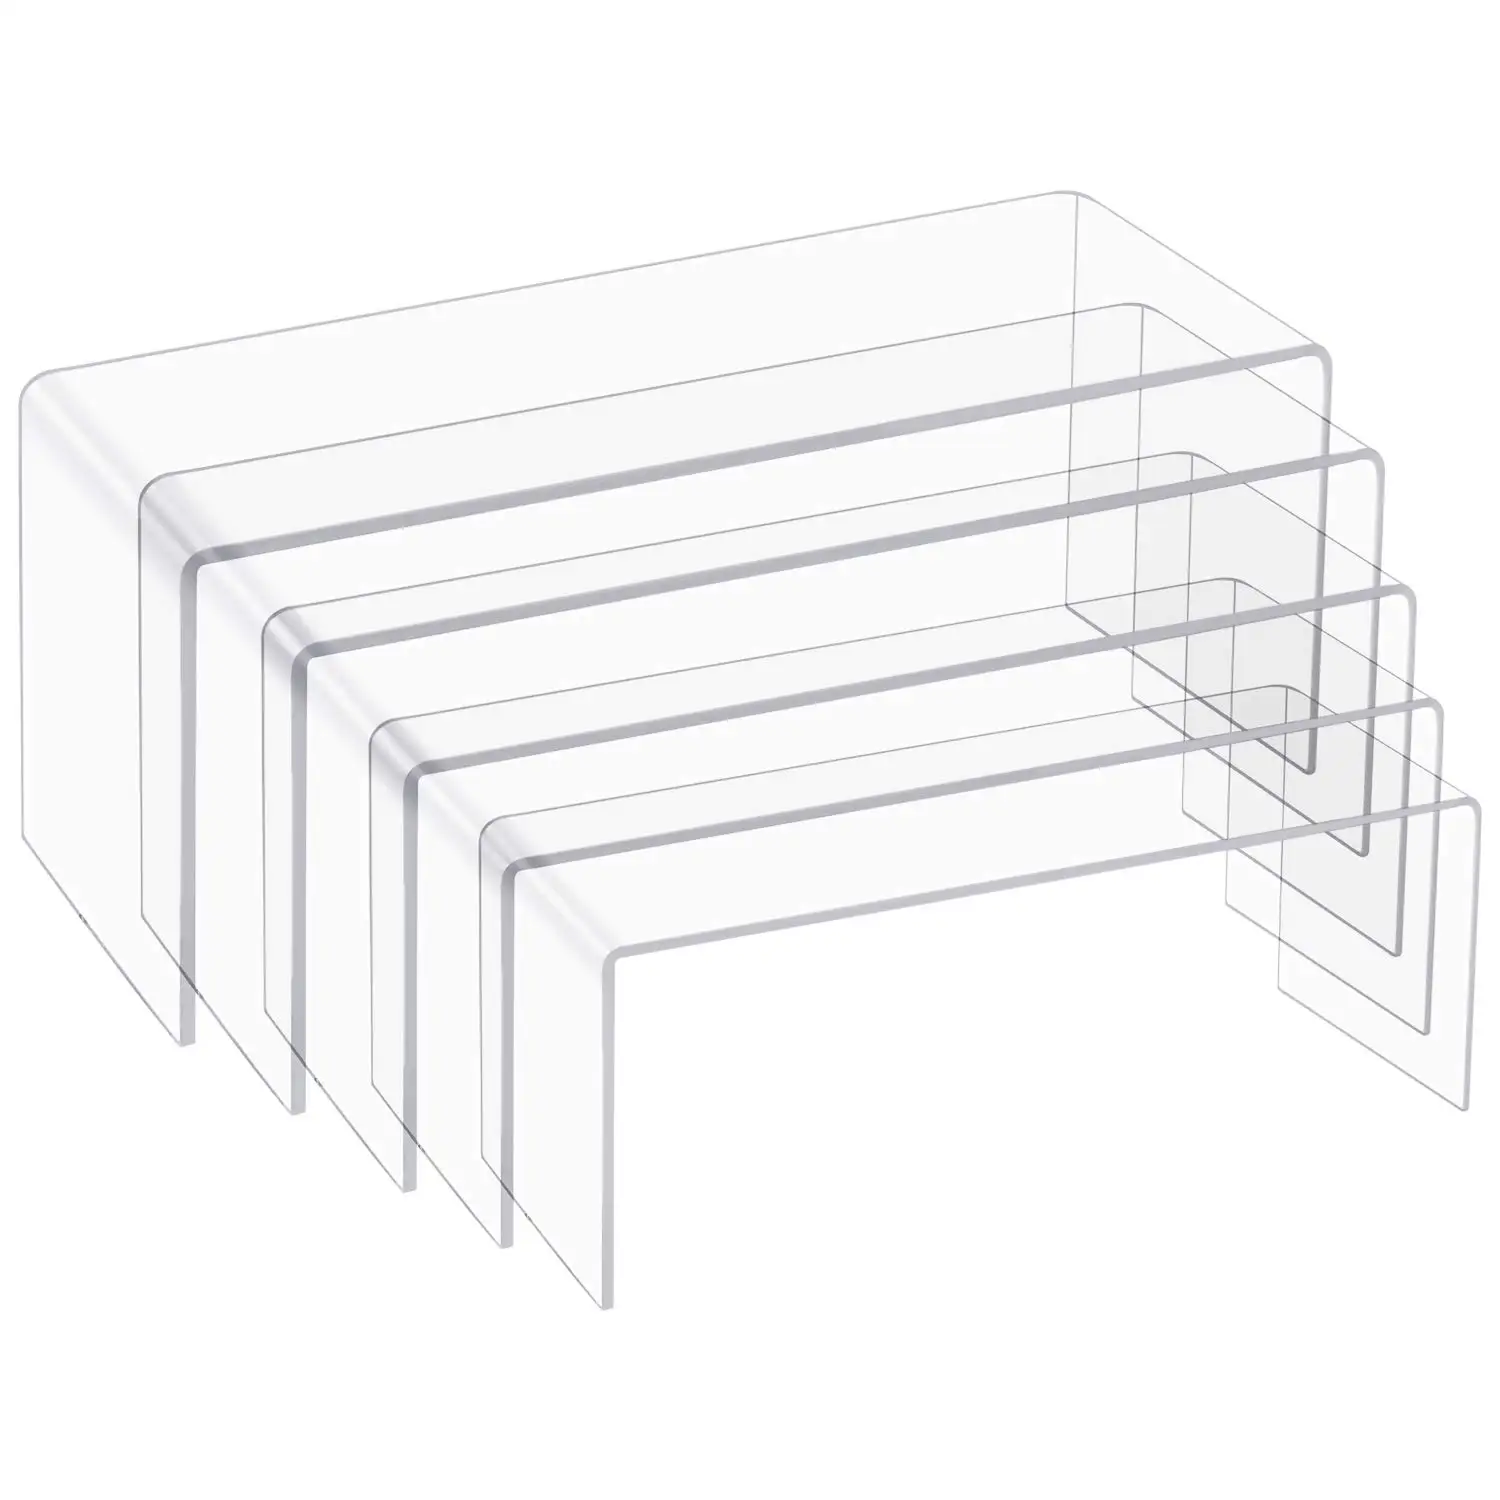 Set of 3 Clear Acrylic Display Riser Jewelry Showcase Fixtures 3", 4", 5" 